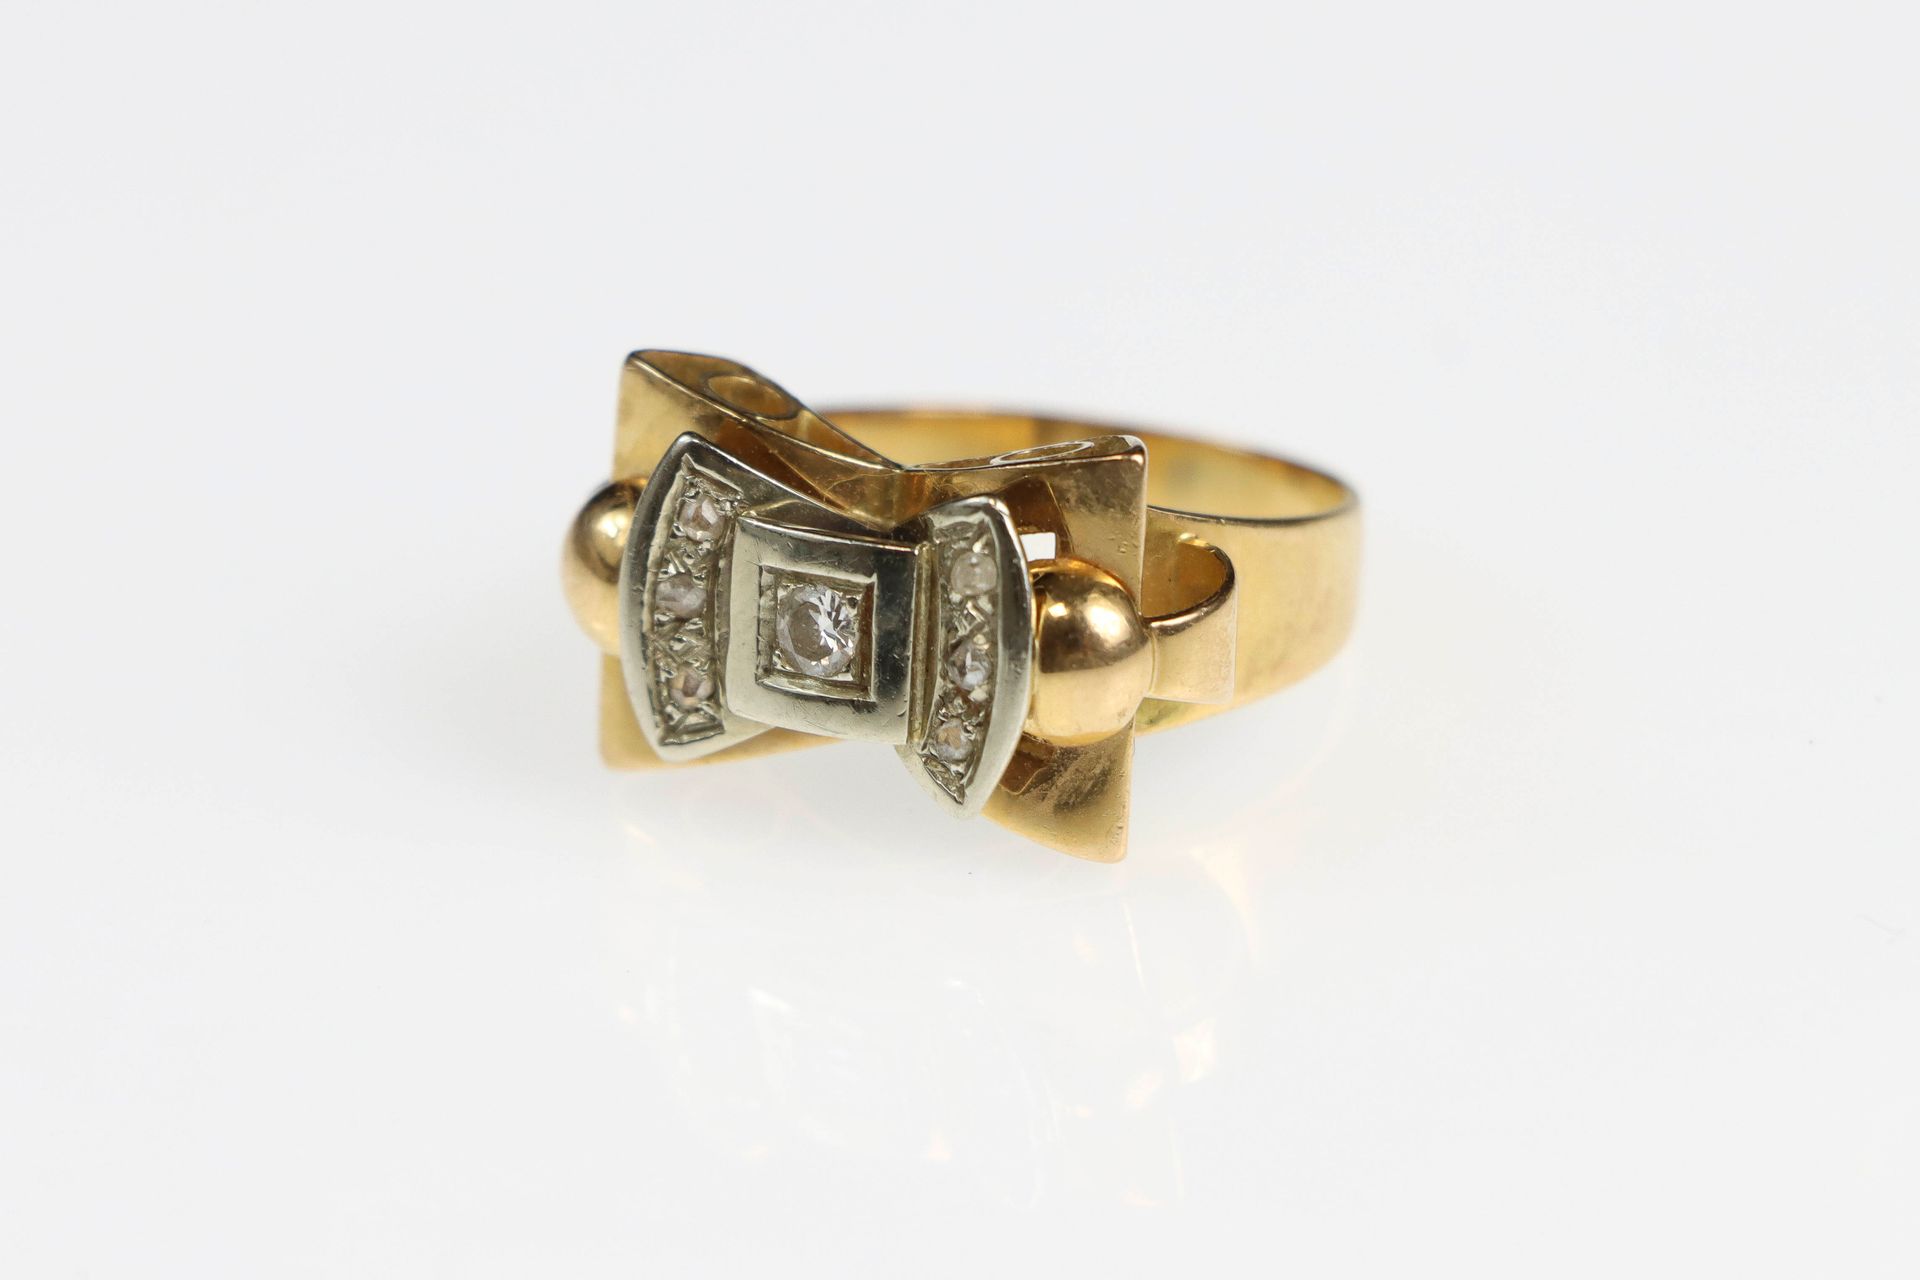 Null Ring "Tank nœud" in two-tone gold set with diamonds. Gross weight : 6,5 g